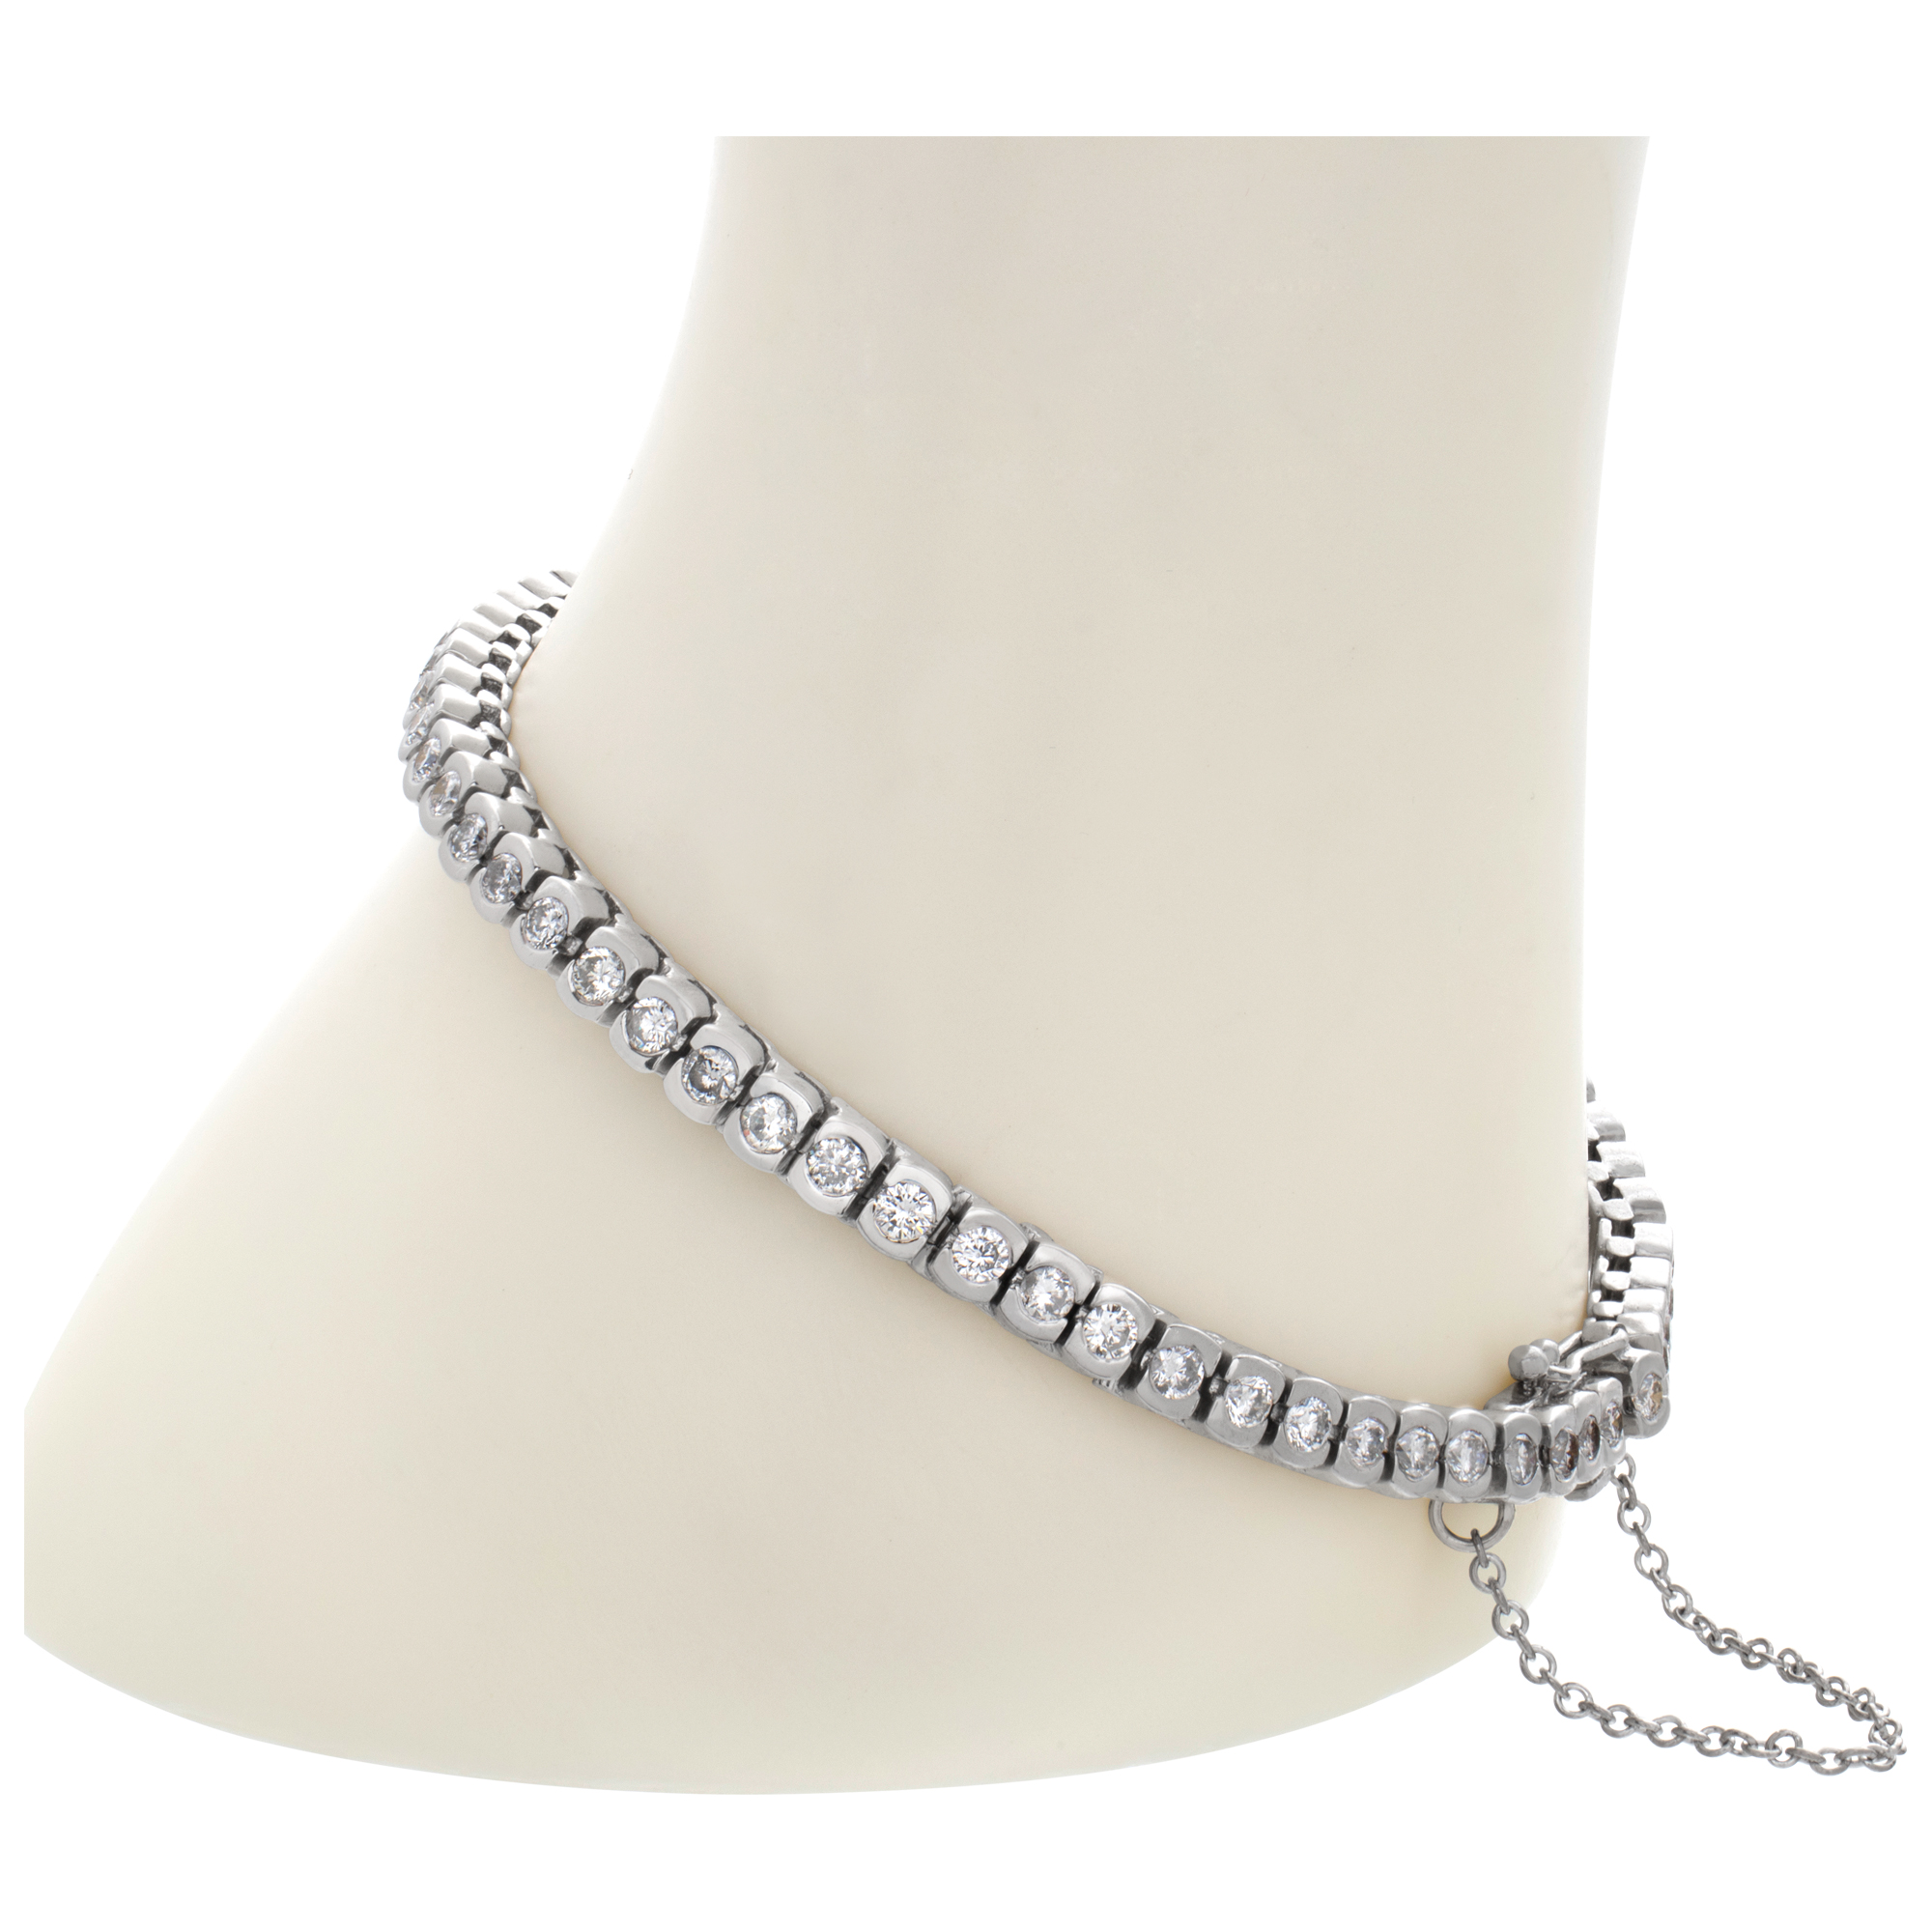 Diamond tennis bracelet in platinum with approximately 6 carats in round diamonds image 4